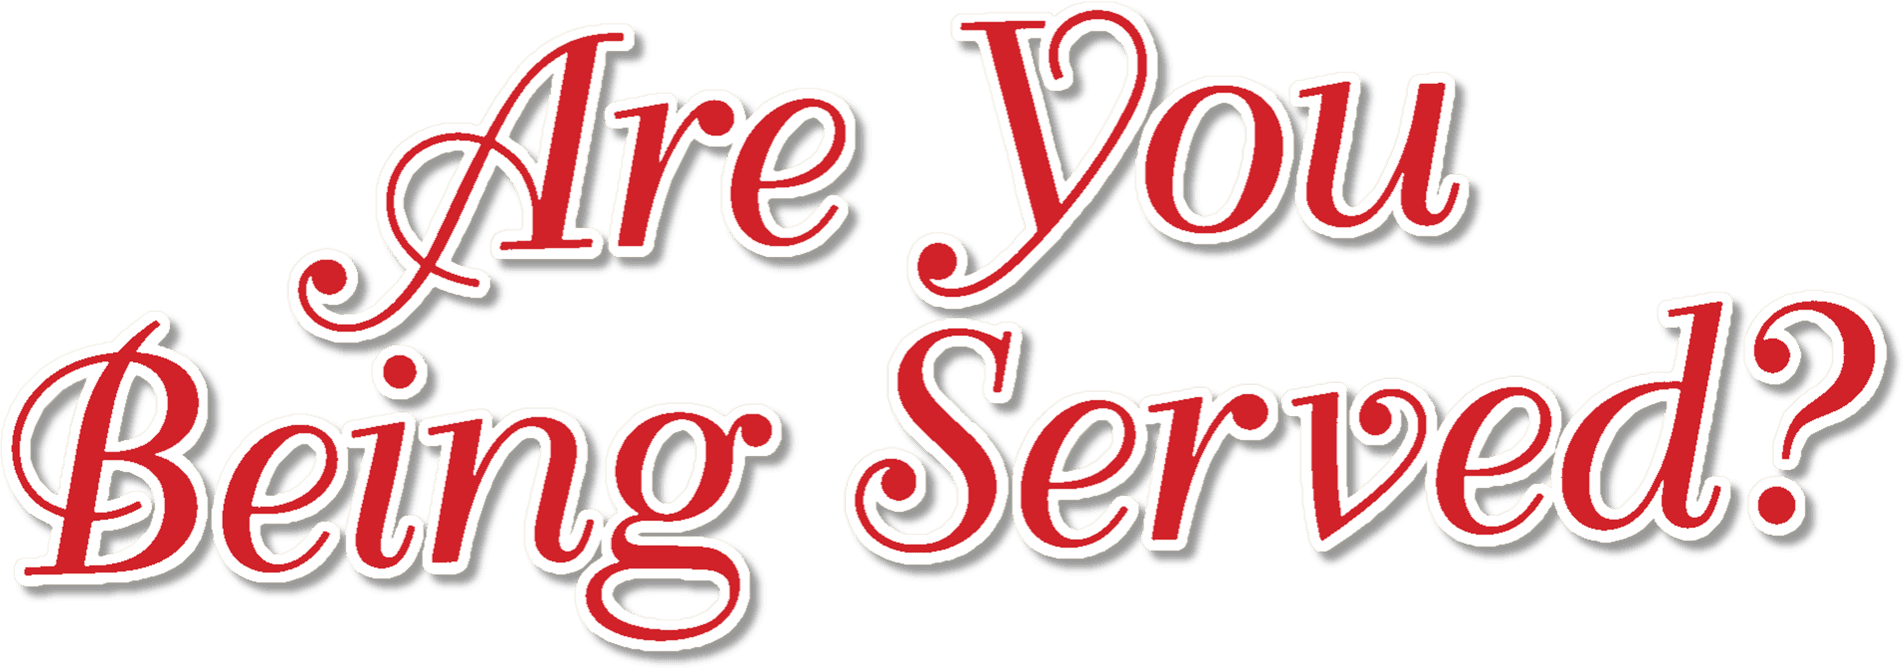 Are You Being Served? logo